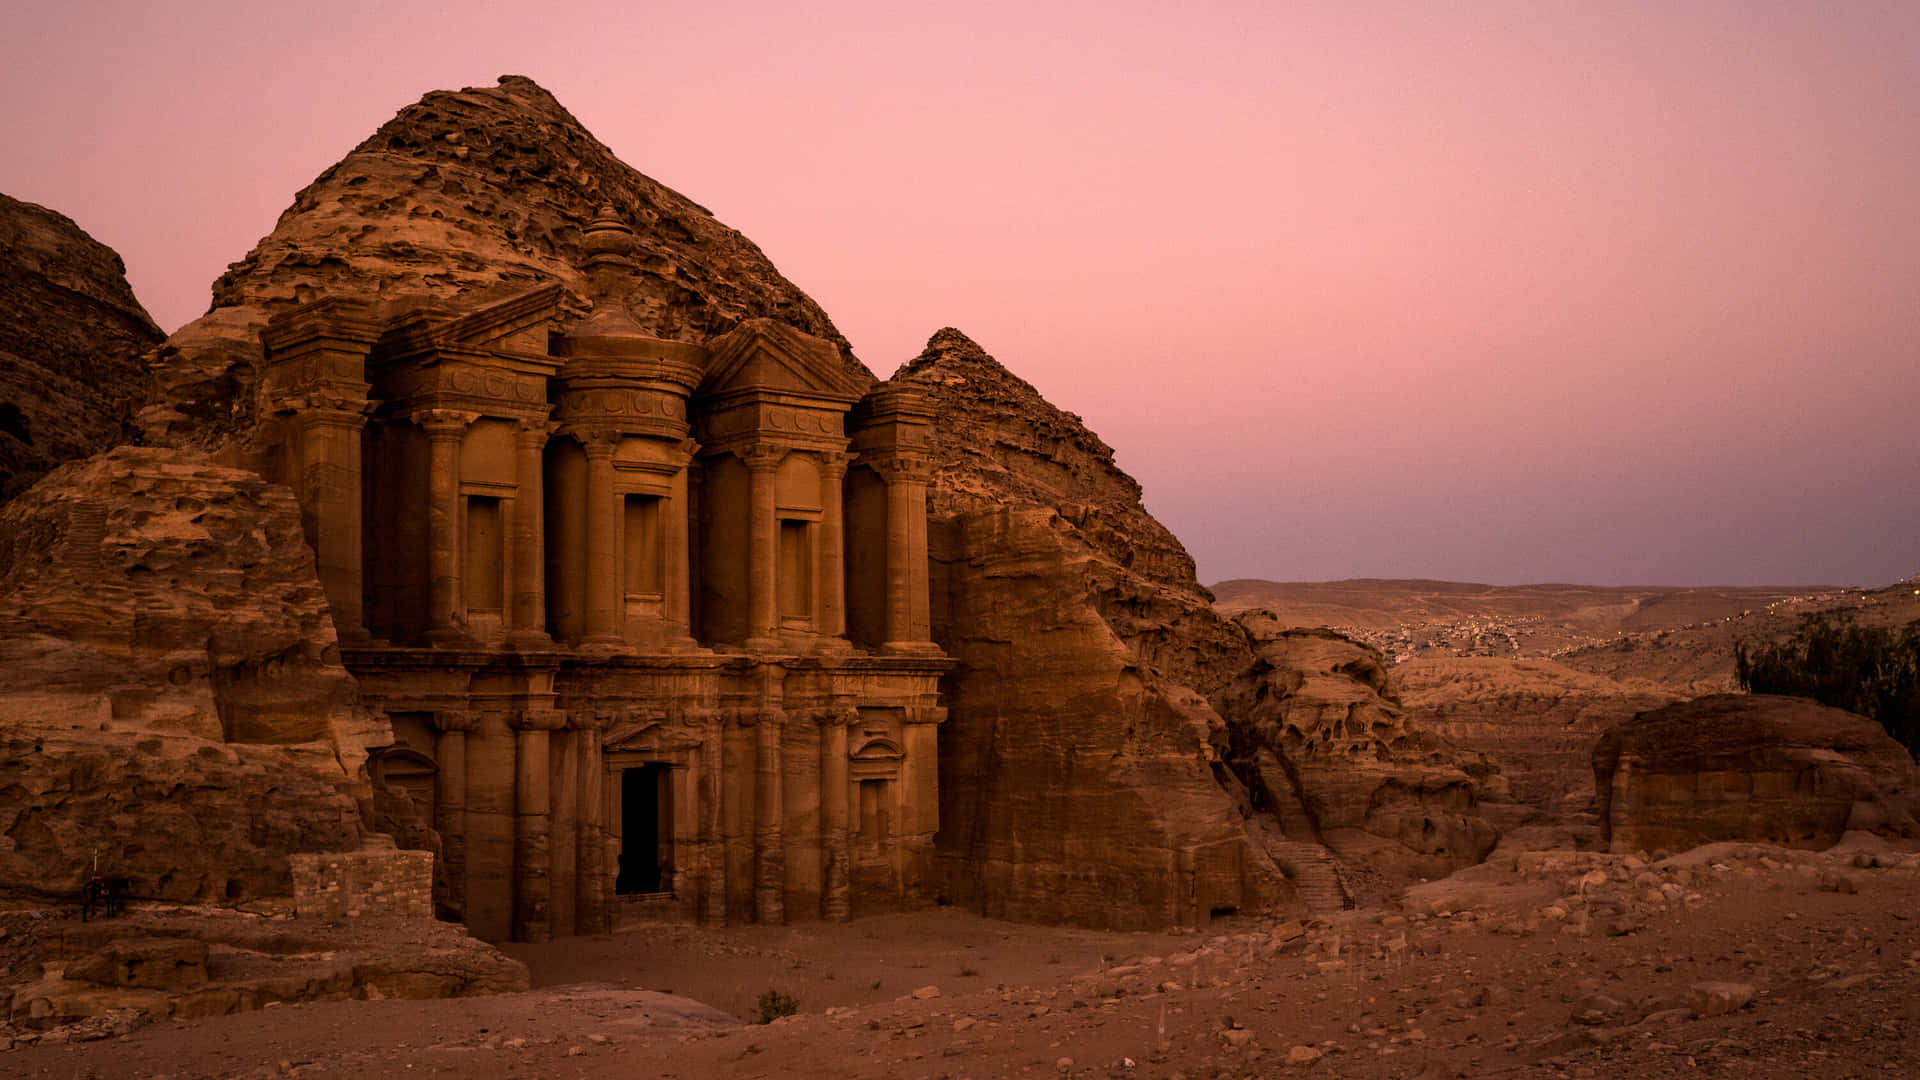 Free Petra Wallpaper Downloads, [100+] Petra Wallpapers for FREE |  